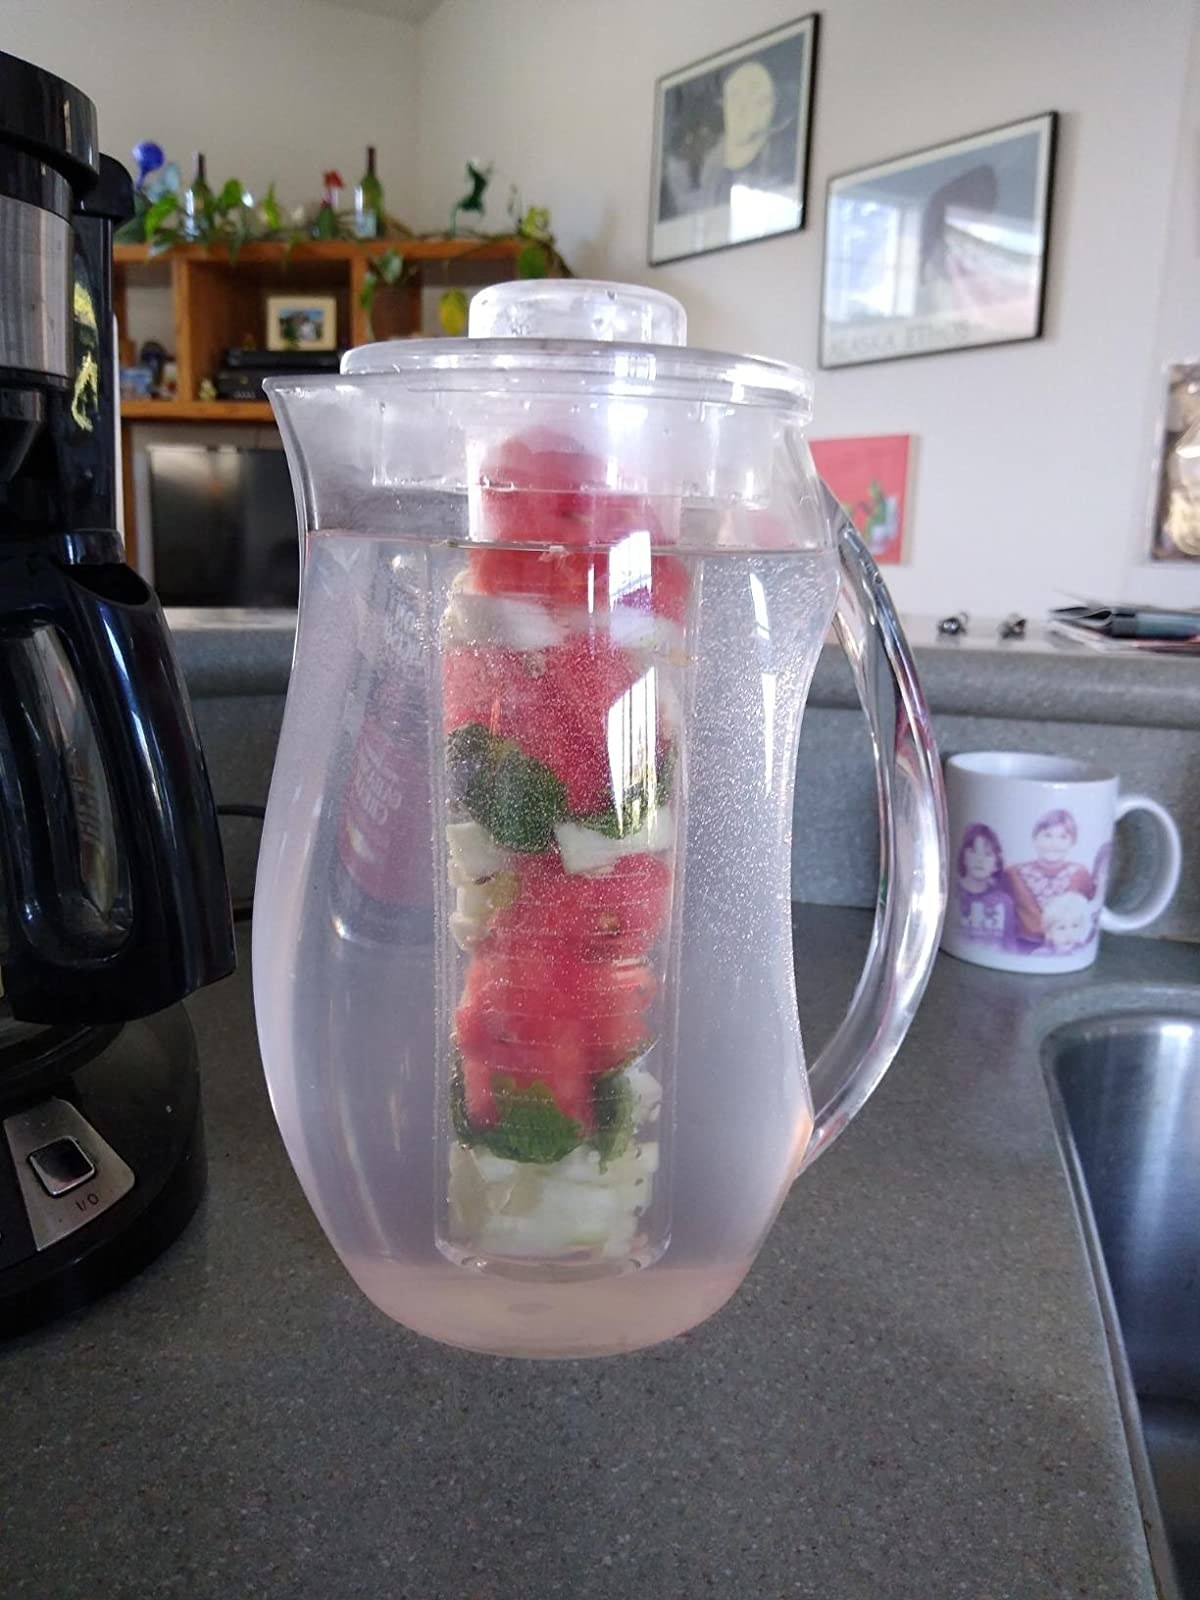 the pitcher filled with water and fruits in the center